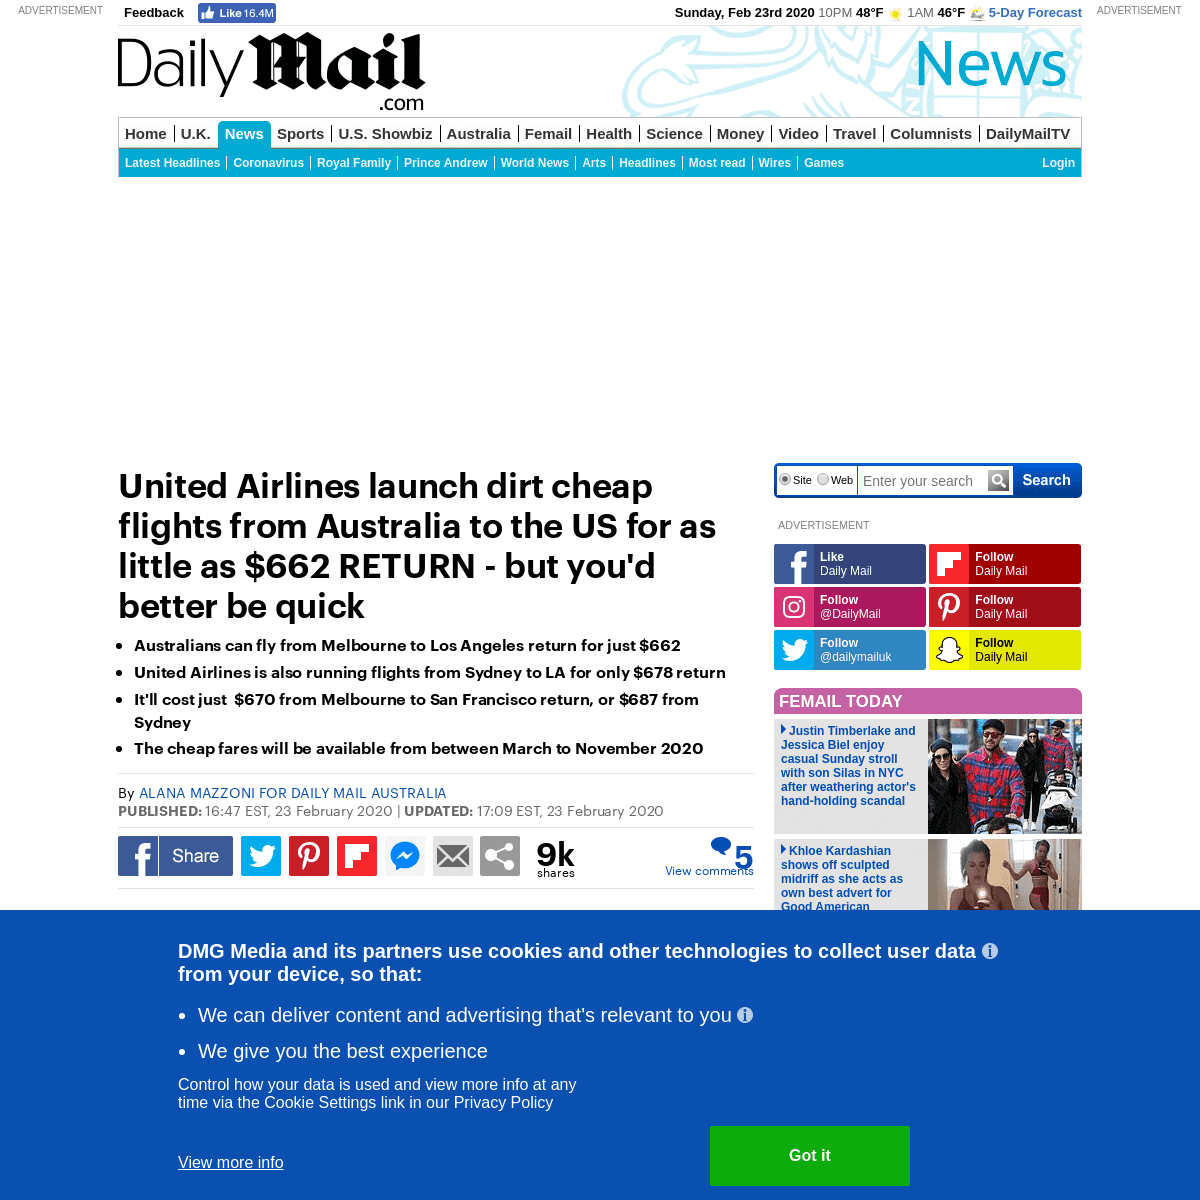 A complete backup of www.dailymail.co.uk/news/article-8035641/United-Airlines-launches-dirt-cheap-flights-Australia-little-662-R